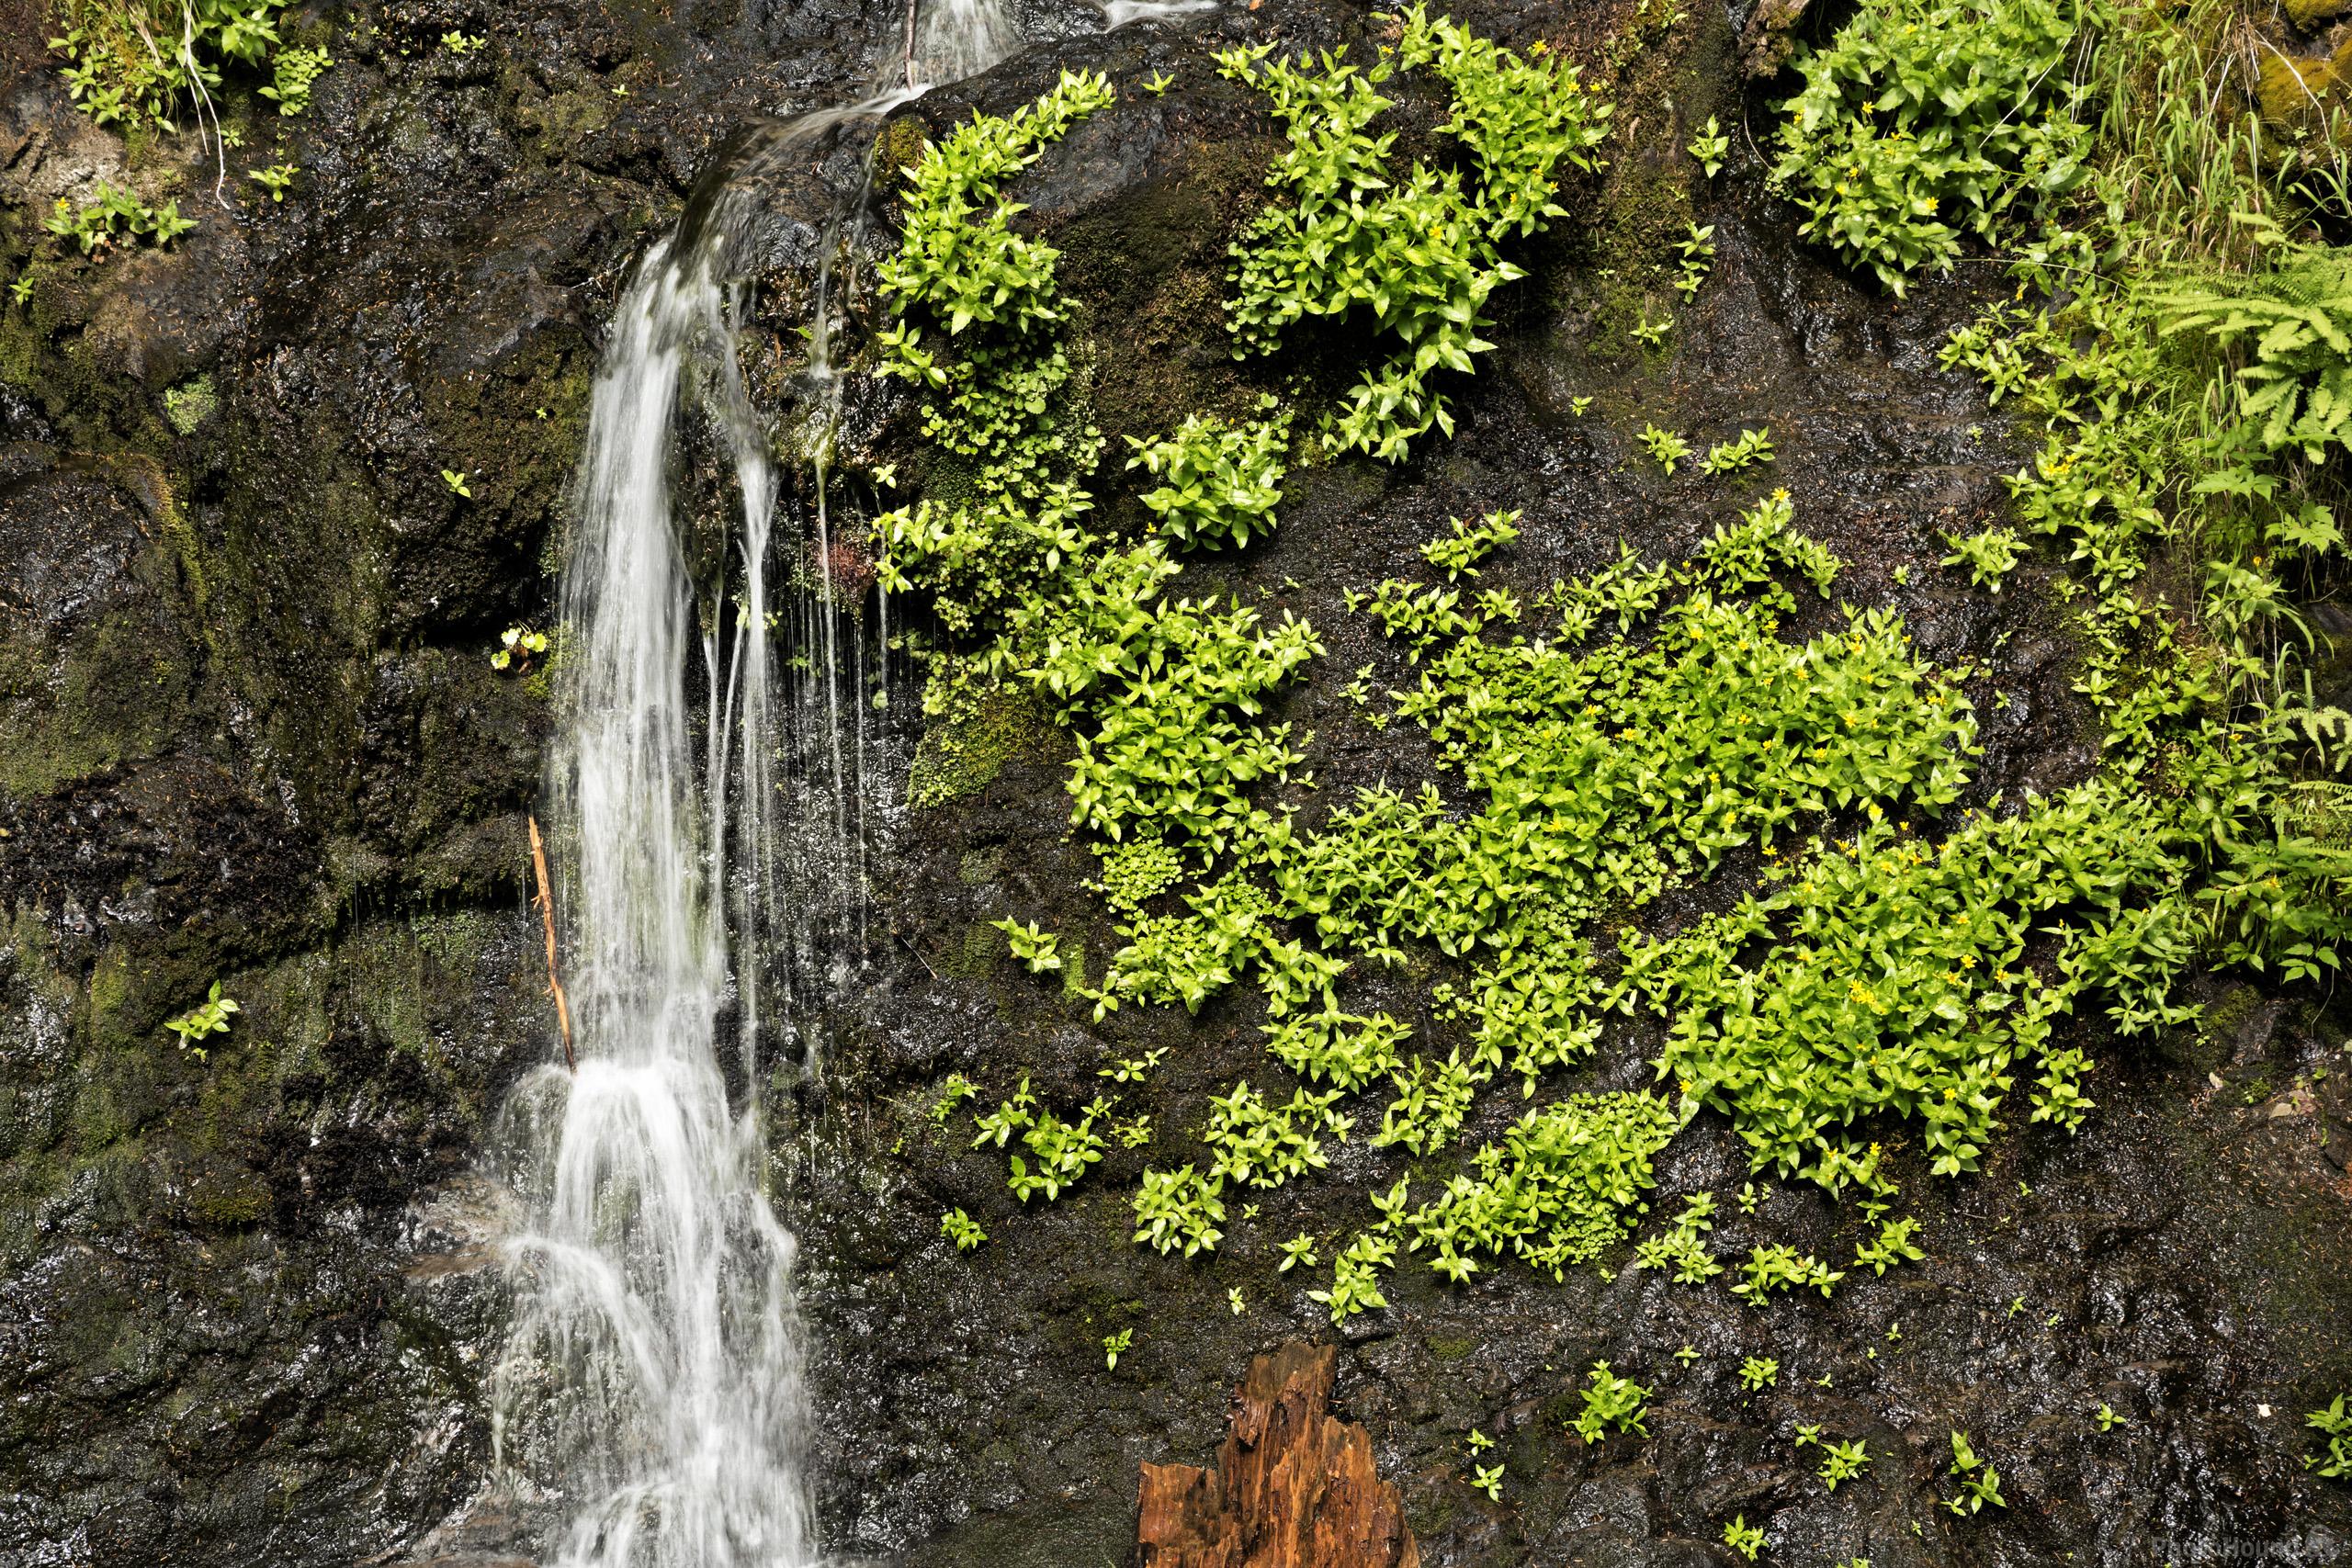 Image of Falls Creek Falls, Mount Rainier National Park by T. Kirkendall and V. Spring